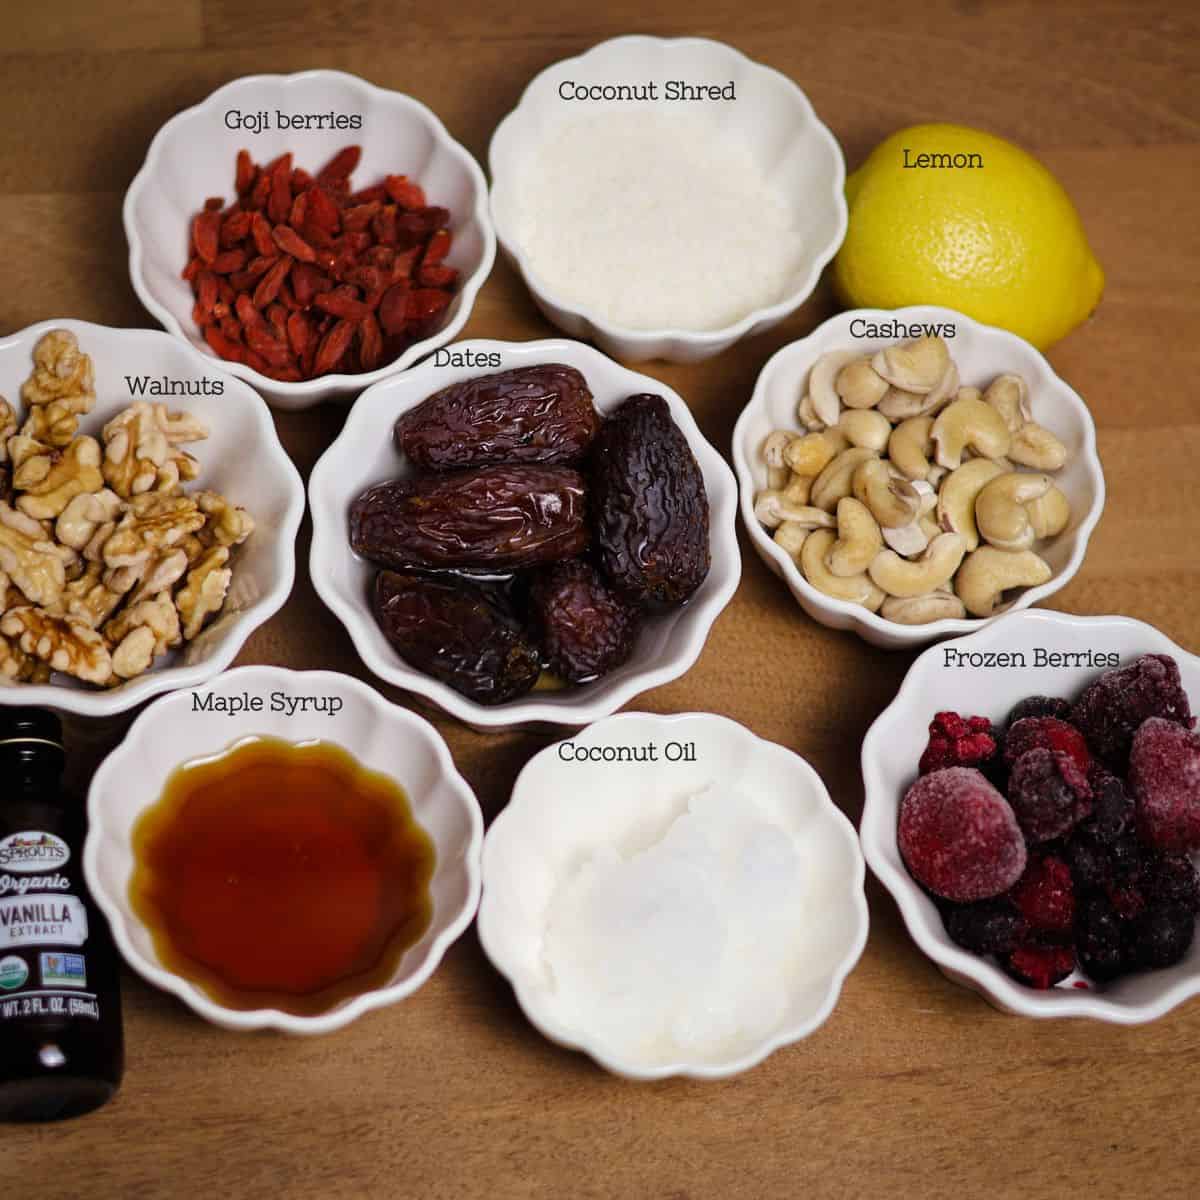 Ingredients for no-bake berry cheesecake arranged on a wooden surface, including nuts, berries, and natural sweeteners.